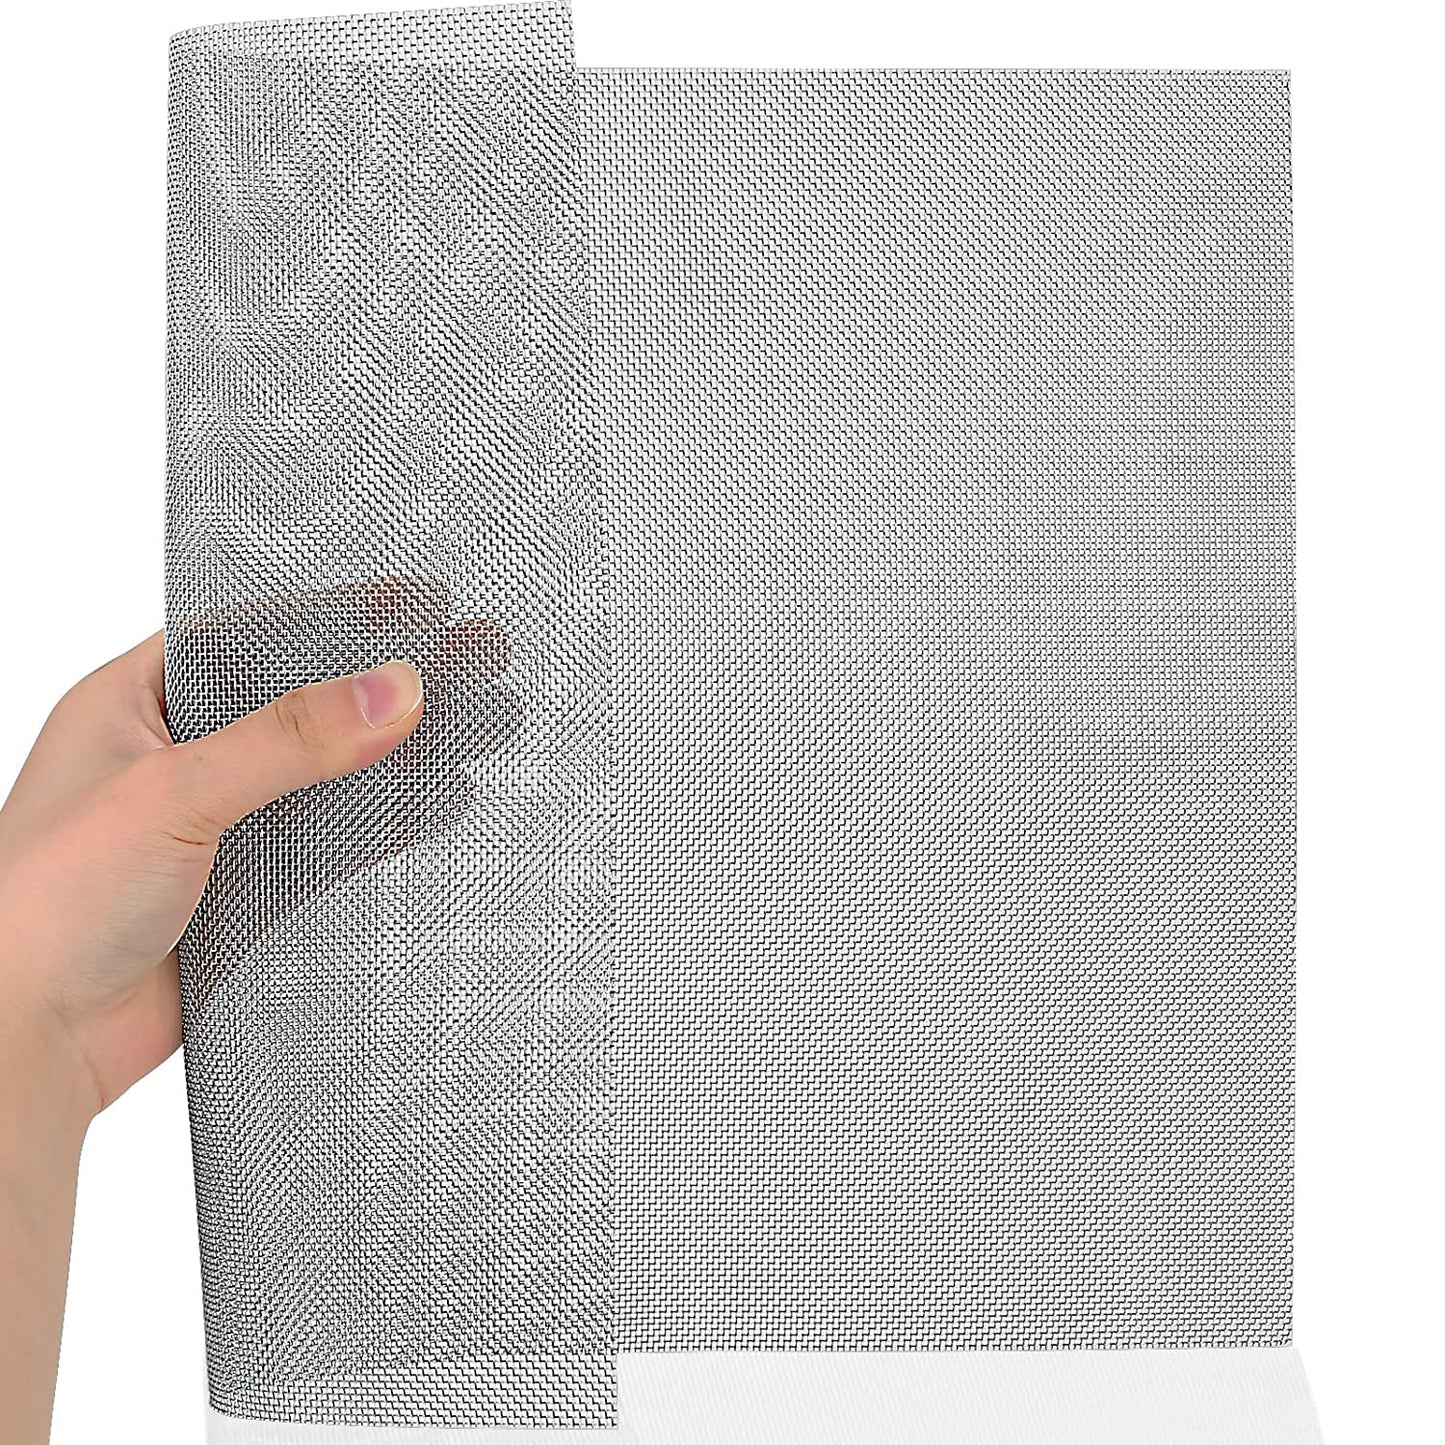 20 Mesh Stainless Steel Mesh Screen 1Pack Woven Wire Mesh 11.3×14.3 Inches (283×363Mm) for Mesh Screen